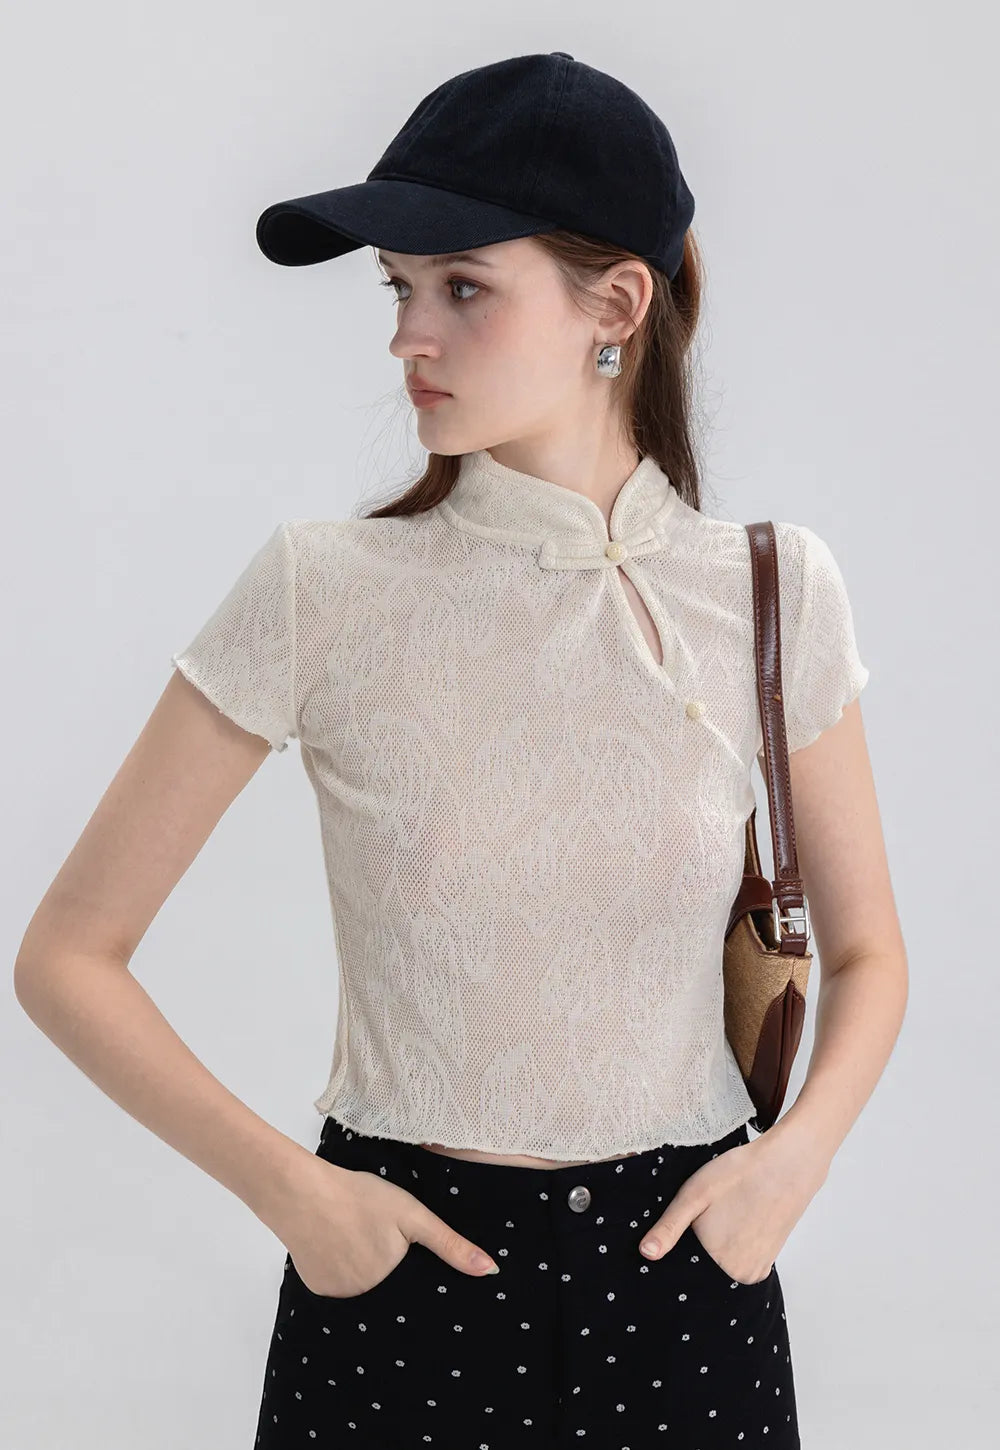 Vintage Charm Lace Blouse with Elegant Frog Button